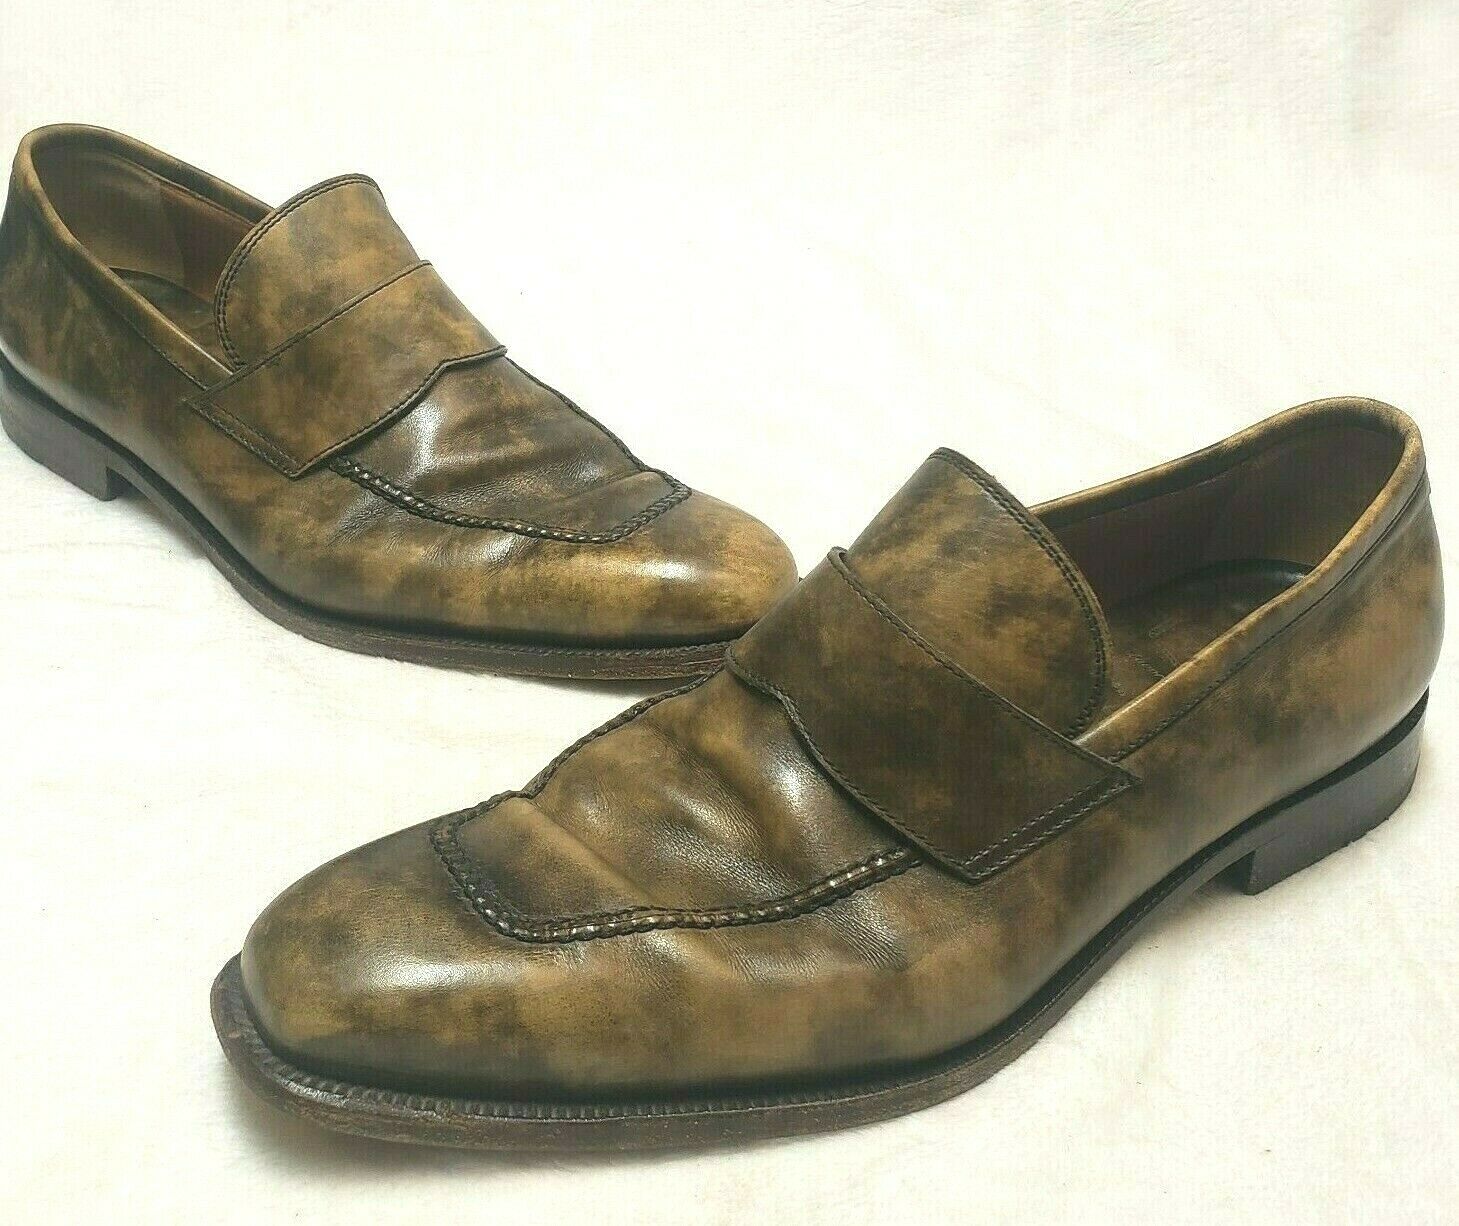 J.R. Barrett Leather Slip on Dress Shoes men's shoes size 11 Made in Italy